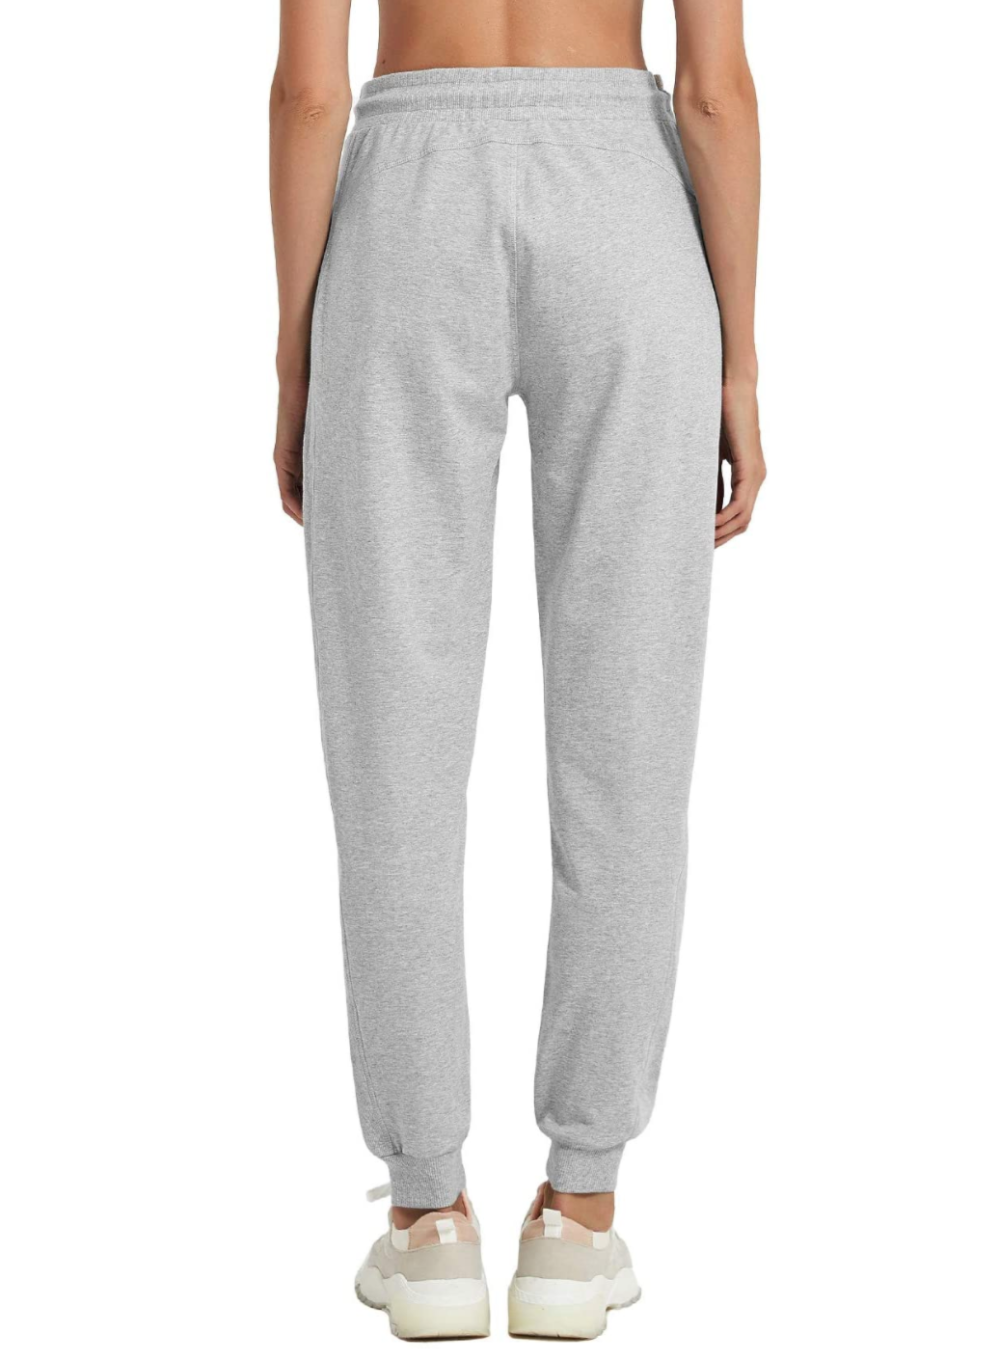 Puli Simple Joggers Are a Staple in Every Loungewear Wardrobe | Us Weekly